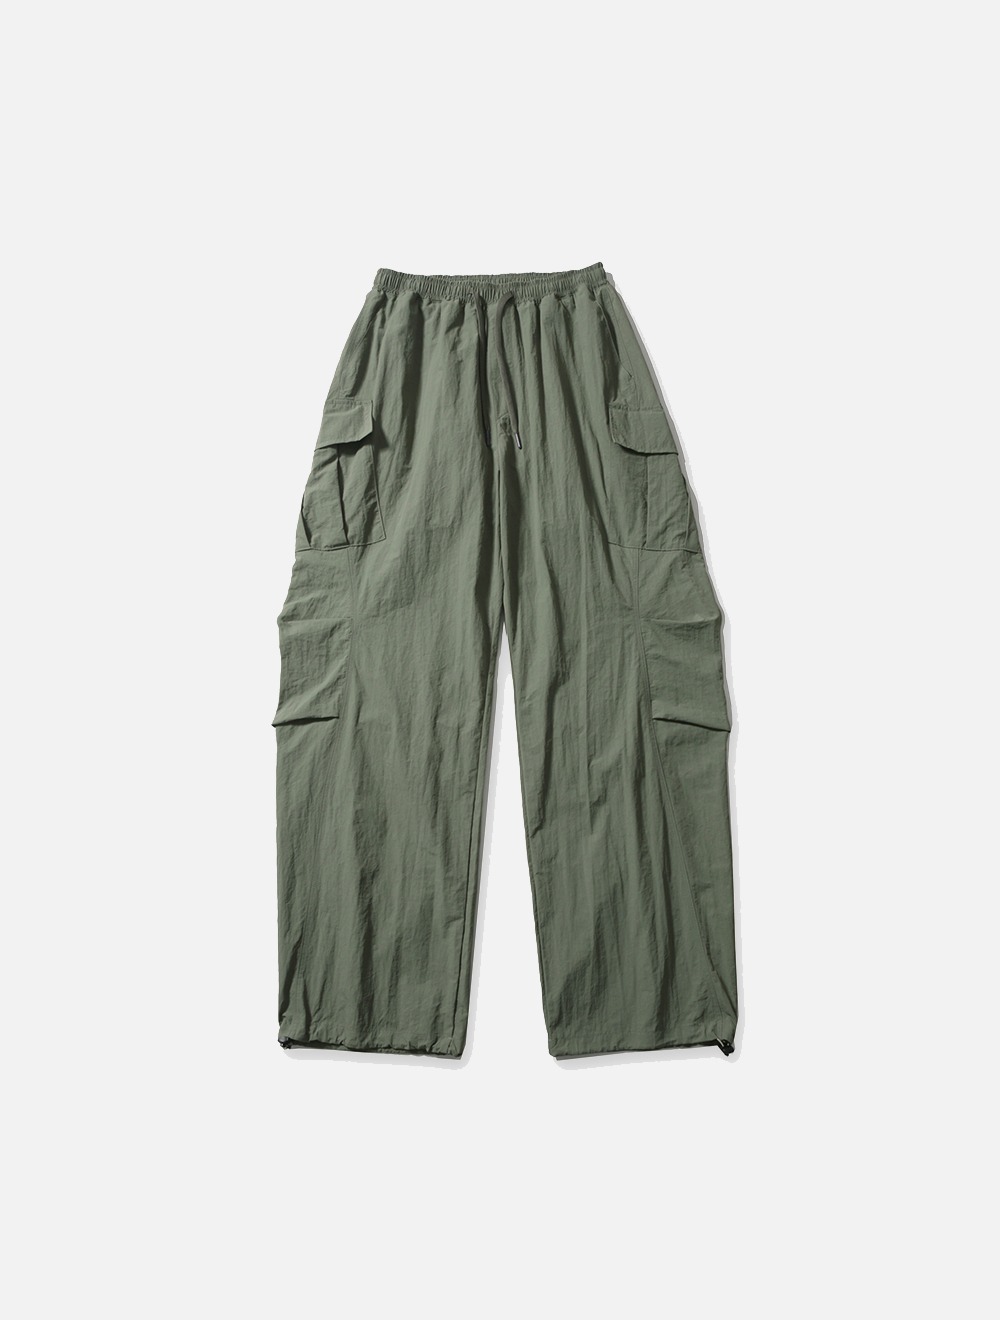 CURVED LINE PARACHUTE CARGO PANTS (OLIVE)